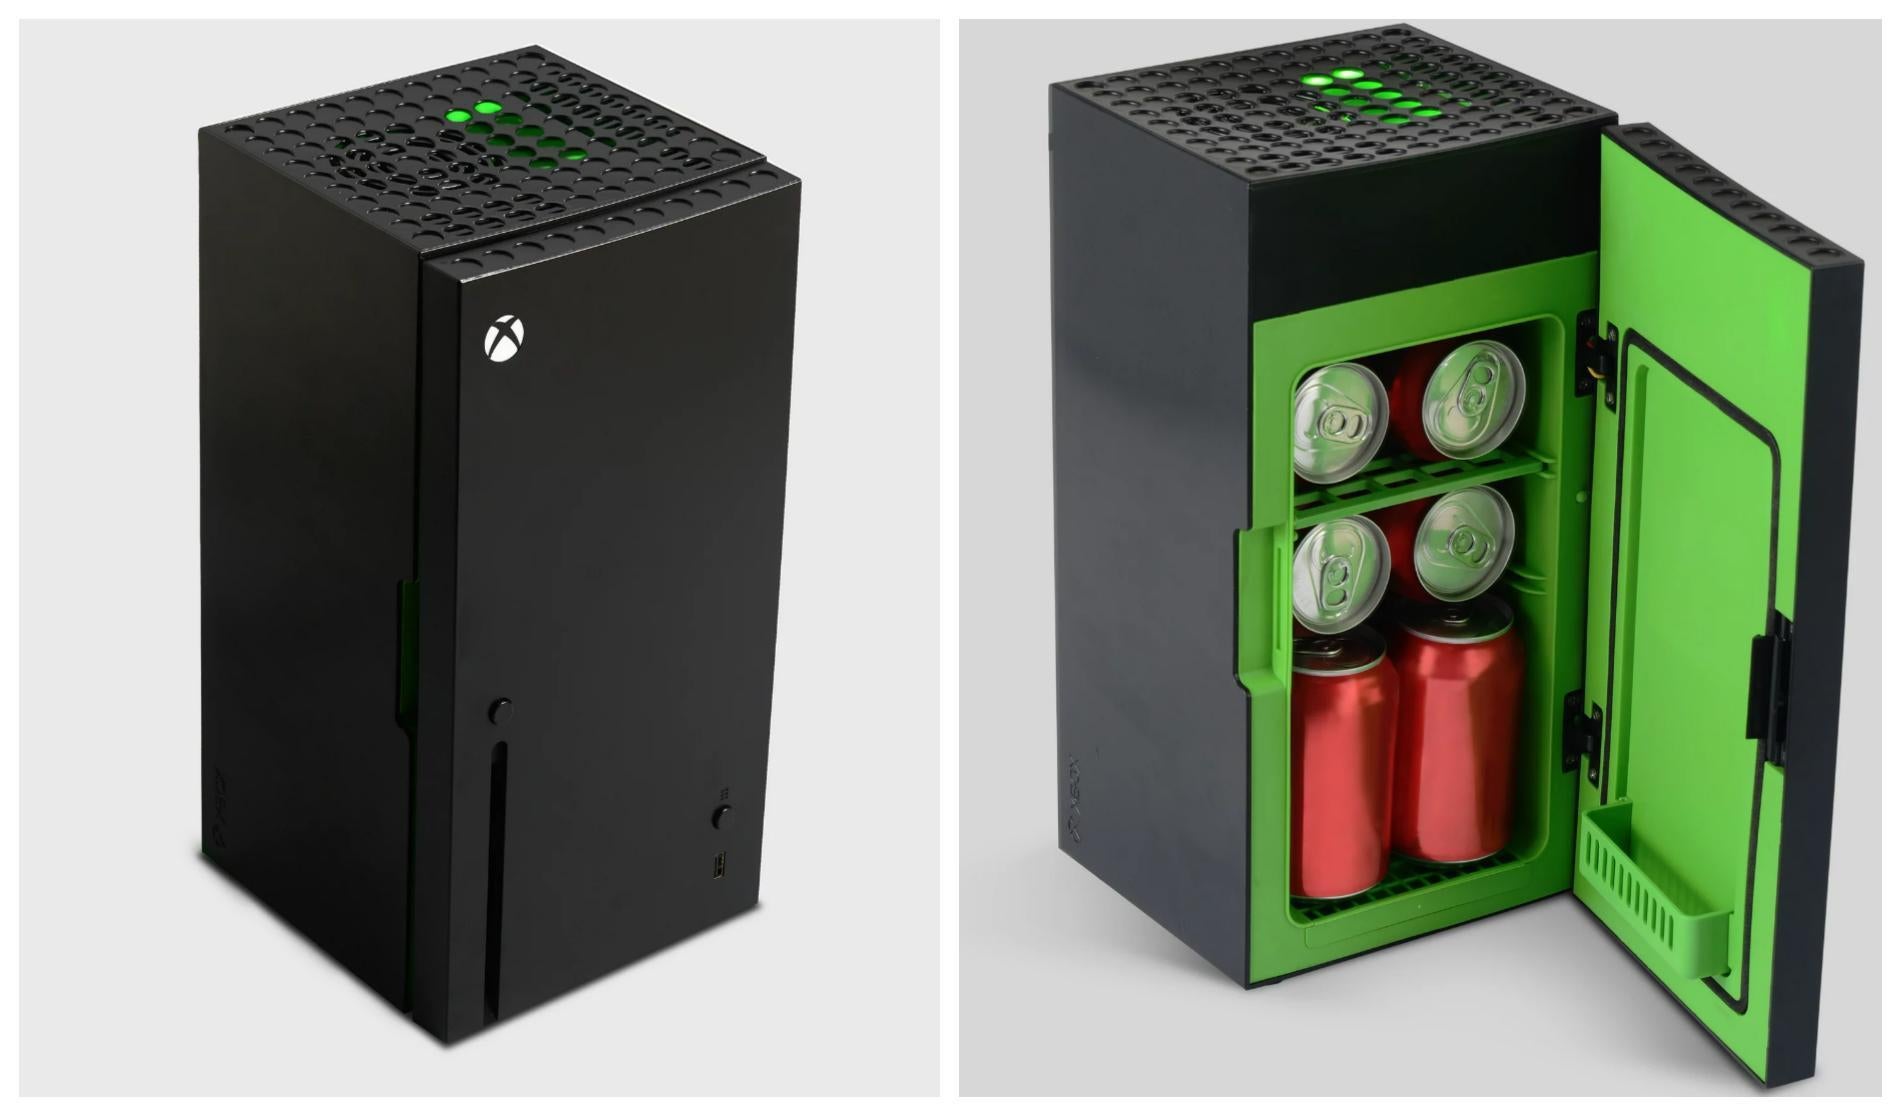 The Xbox Series X Mini Fridge is available to buy now in the UK and US